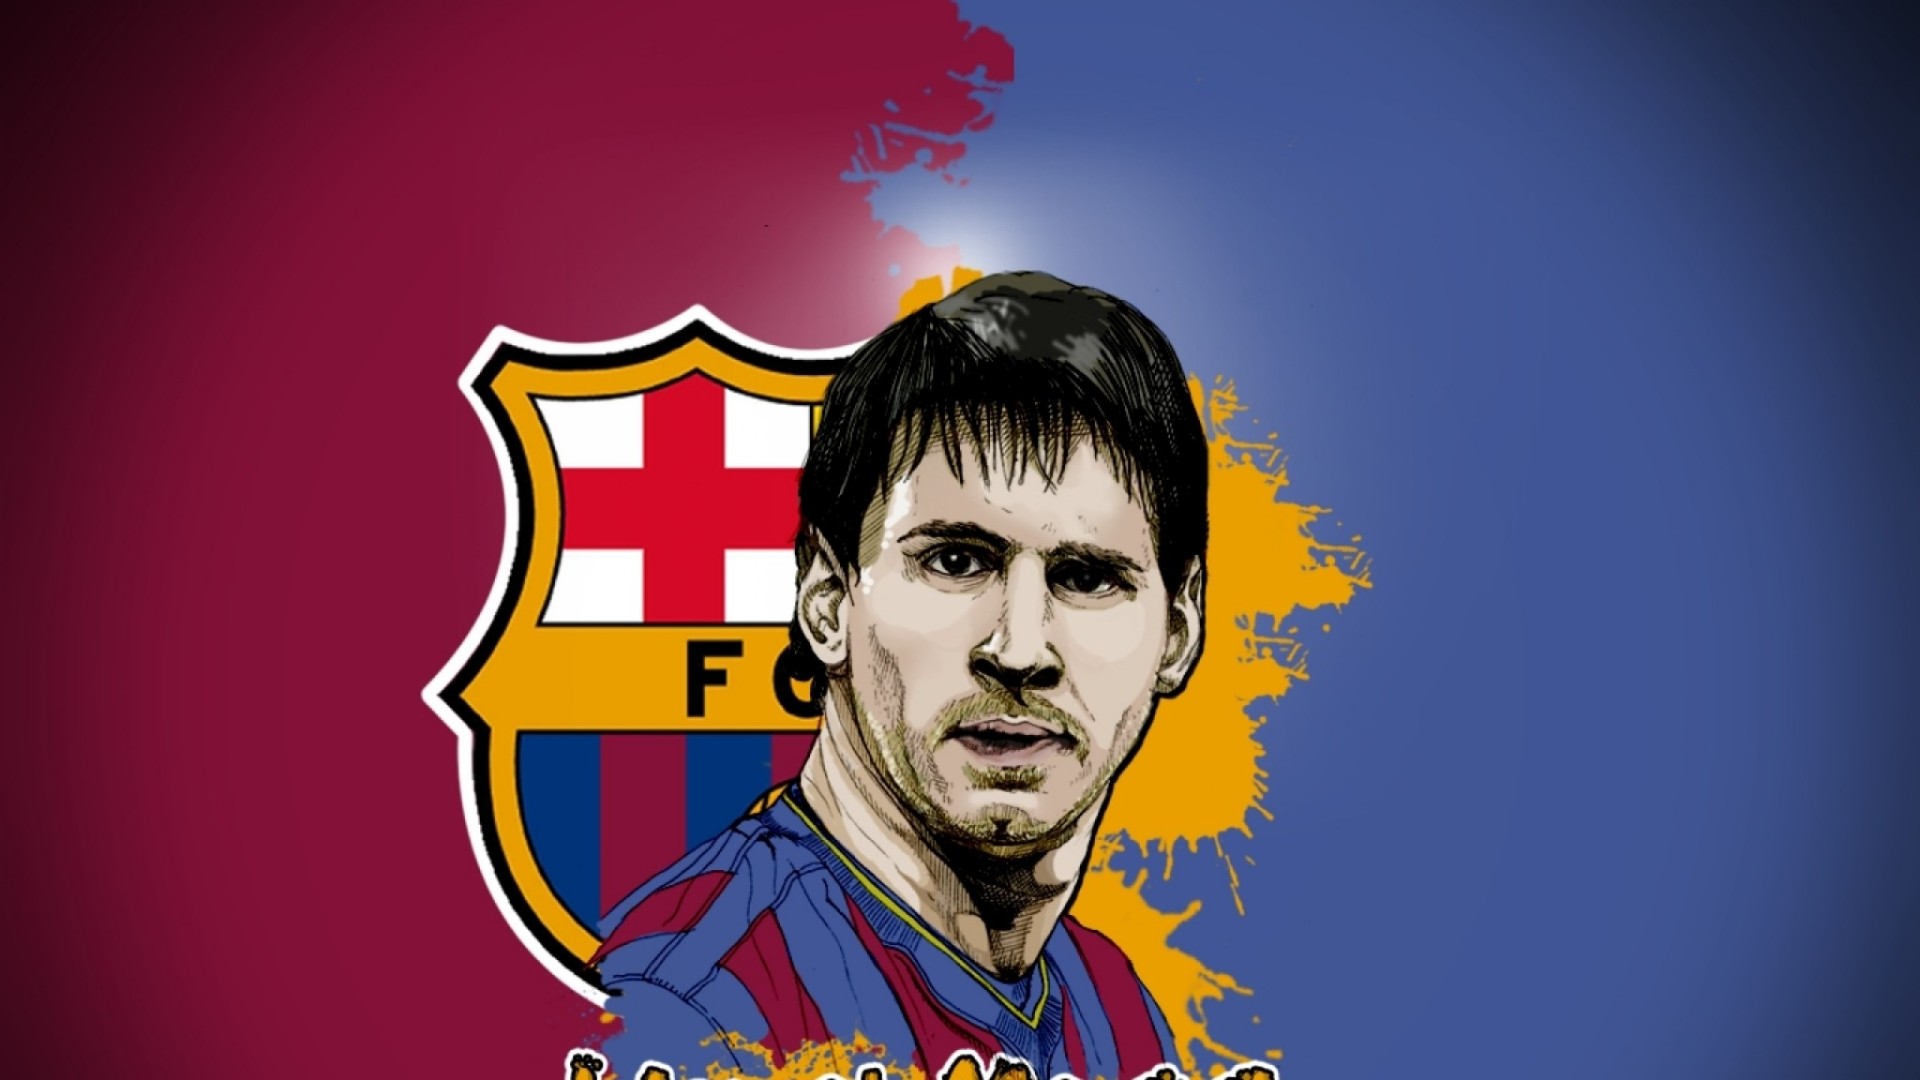 Lionel Messi 1080p  Wallpaper, High Definition, High Quality 